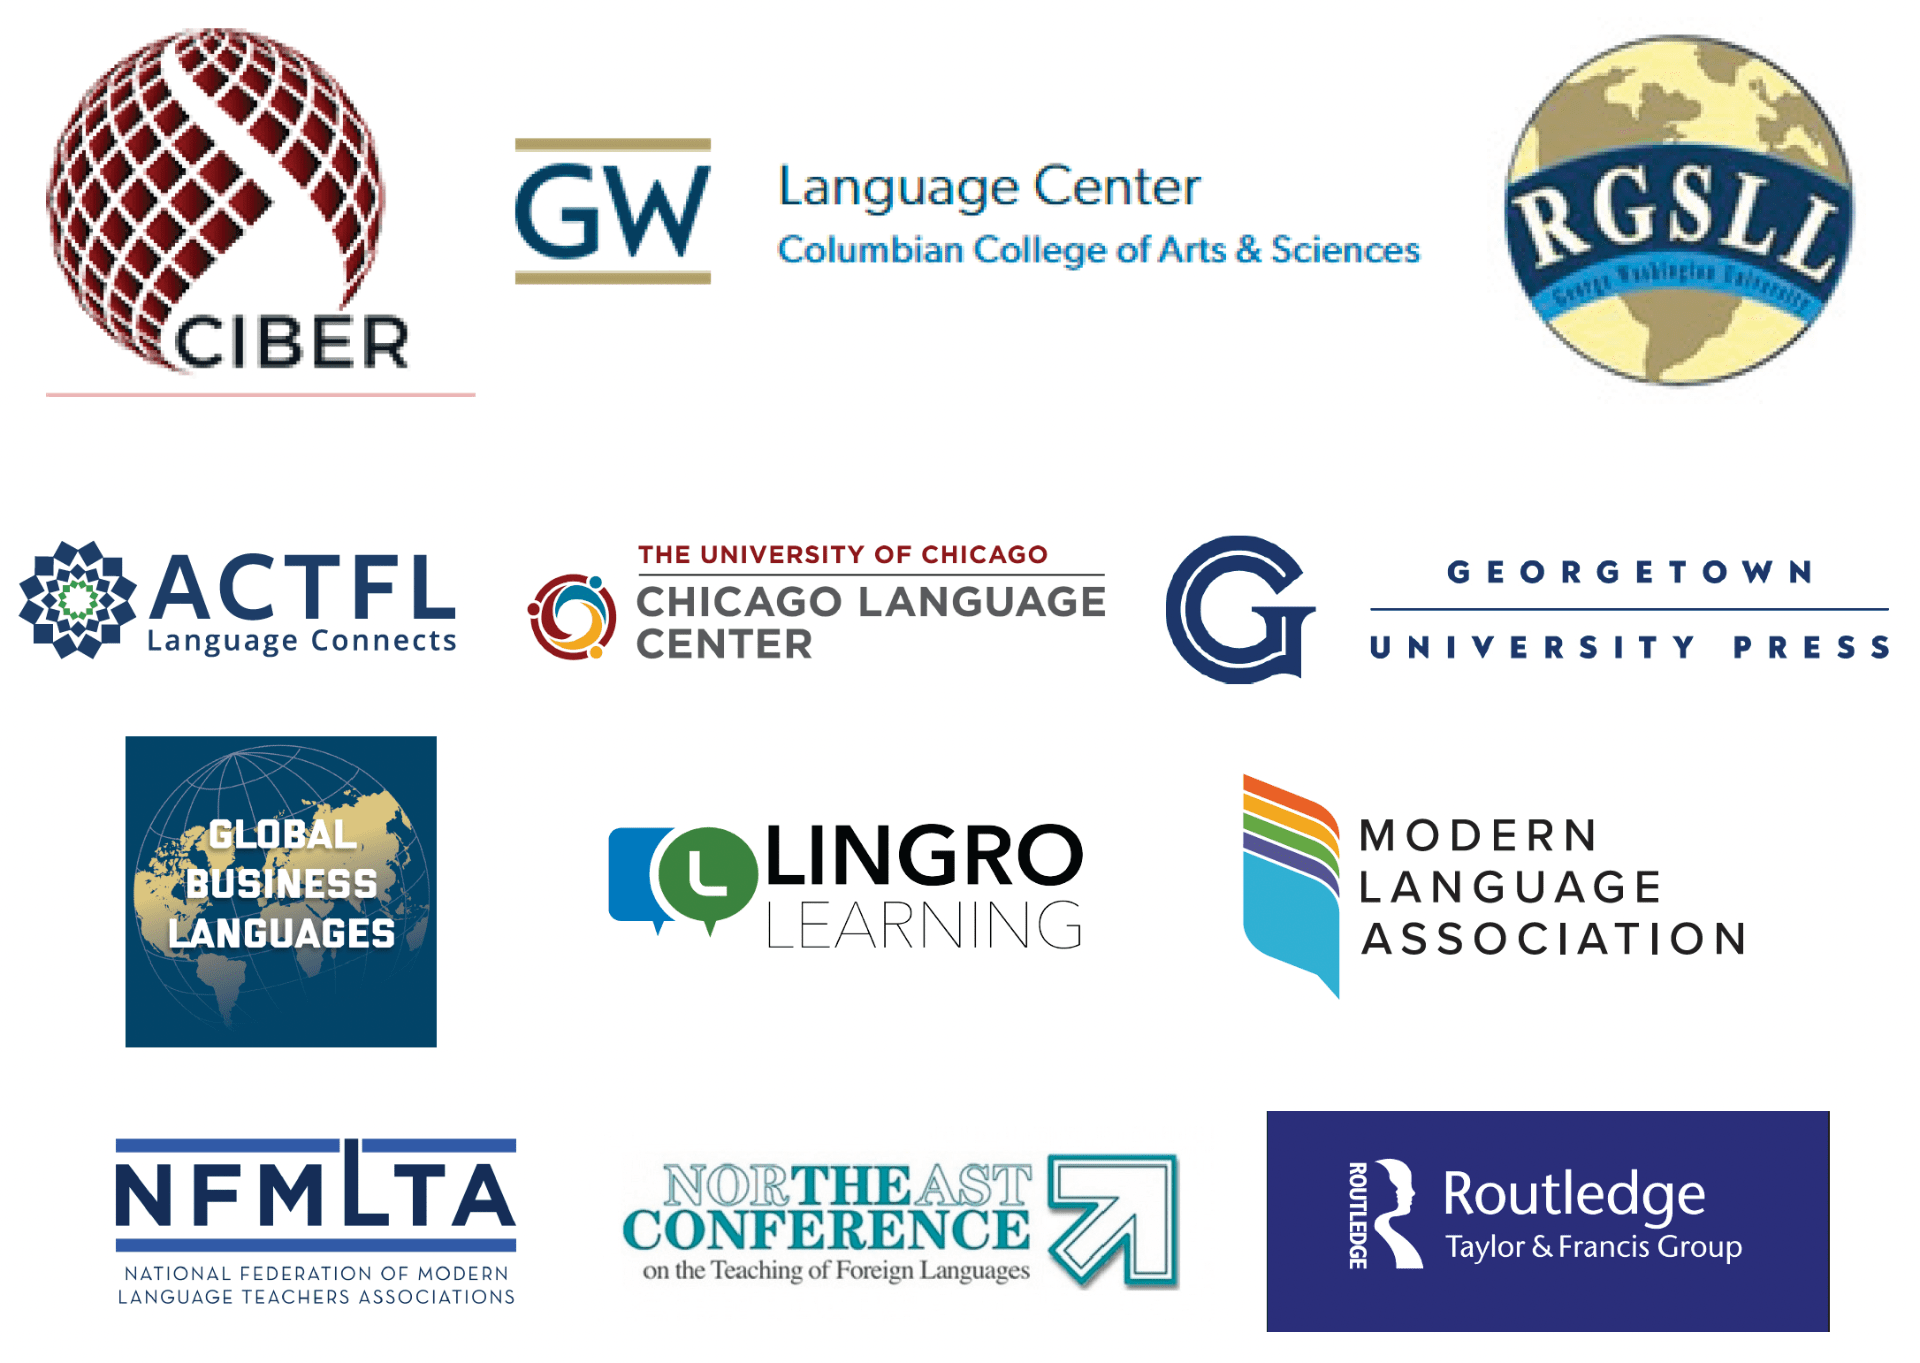 Logos of Conference Sponsors and Exhibitors, including LingroLearning, Georgetown University Press, NECTFL, NFMLTA, CIBERs, GW-CIBER, Routledge, Global Business Languages journal, GW Language Center, GW RGSLL